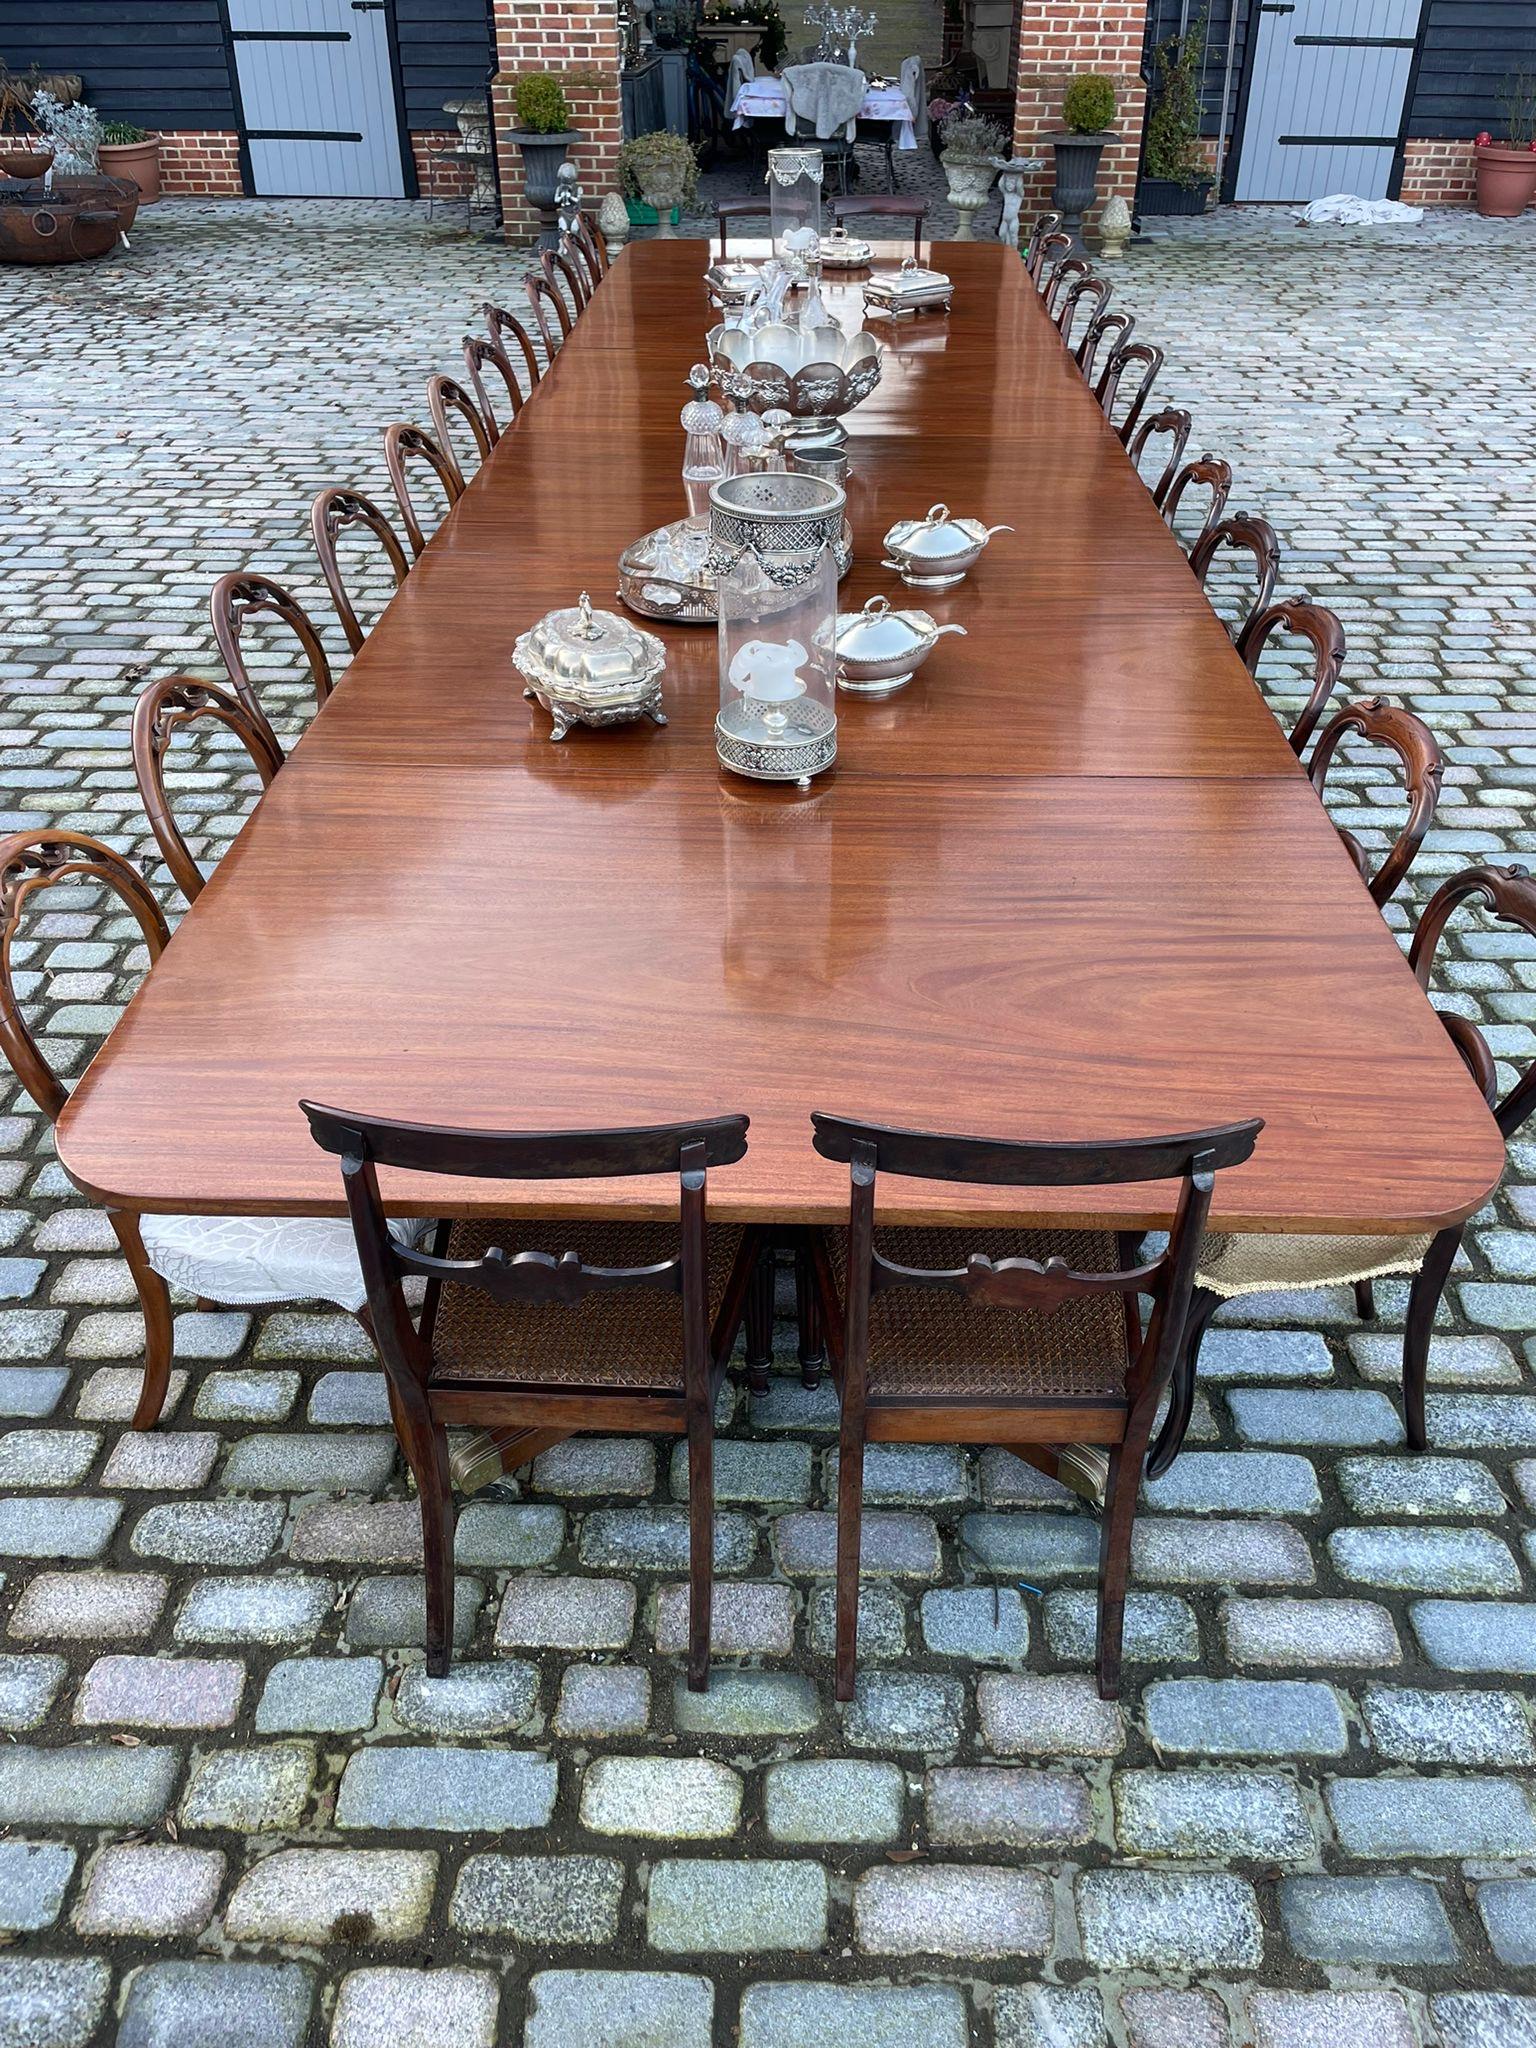 Rare 28 seater 6 pilar Antique Quality Mahogany Dining Table 72 x 161 x 609 cm In Good Condition For Sale In Suffolk, GB